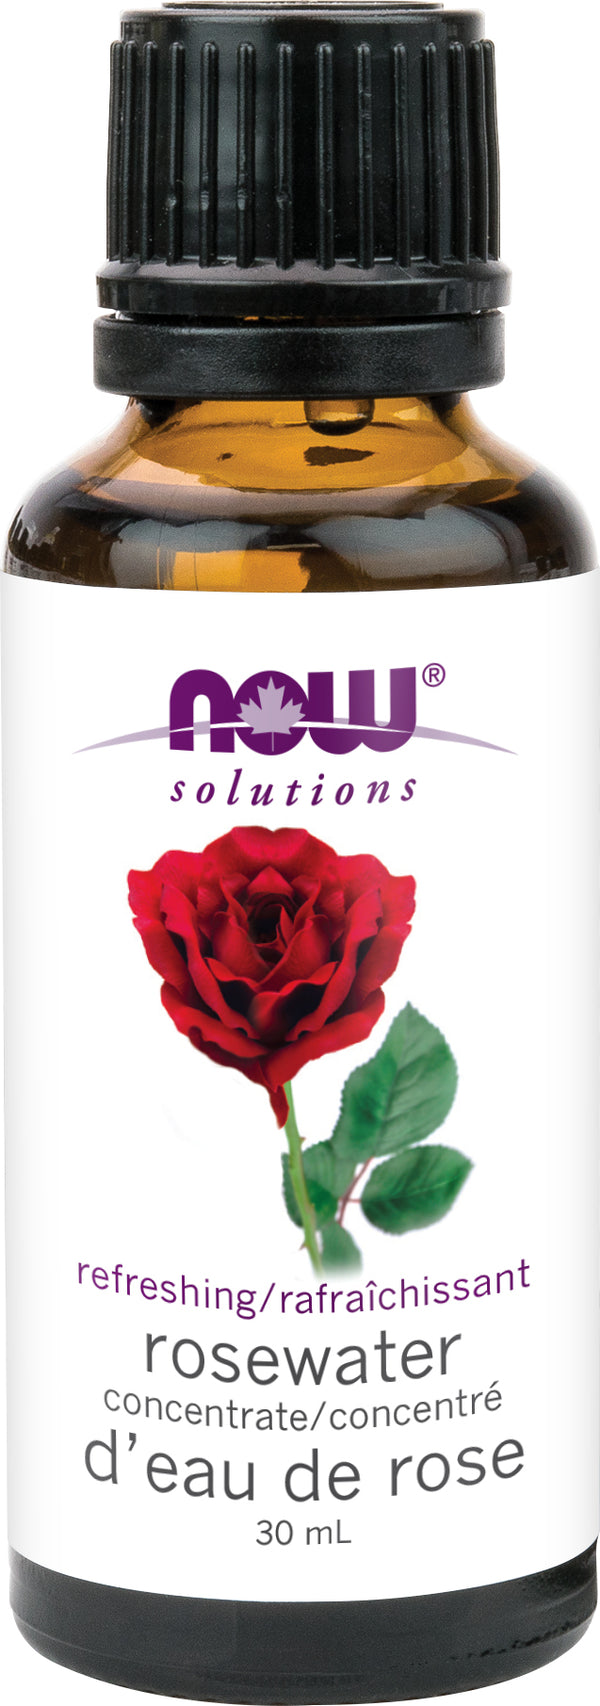 NOW Rosewater Concentrate 30 ml - 1